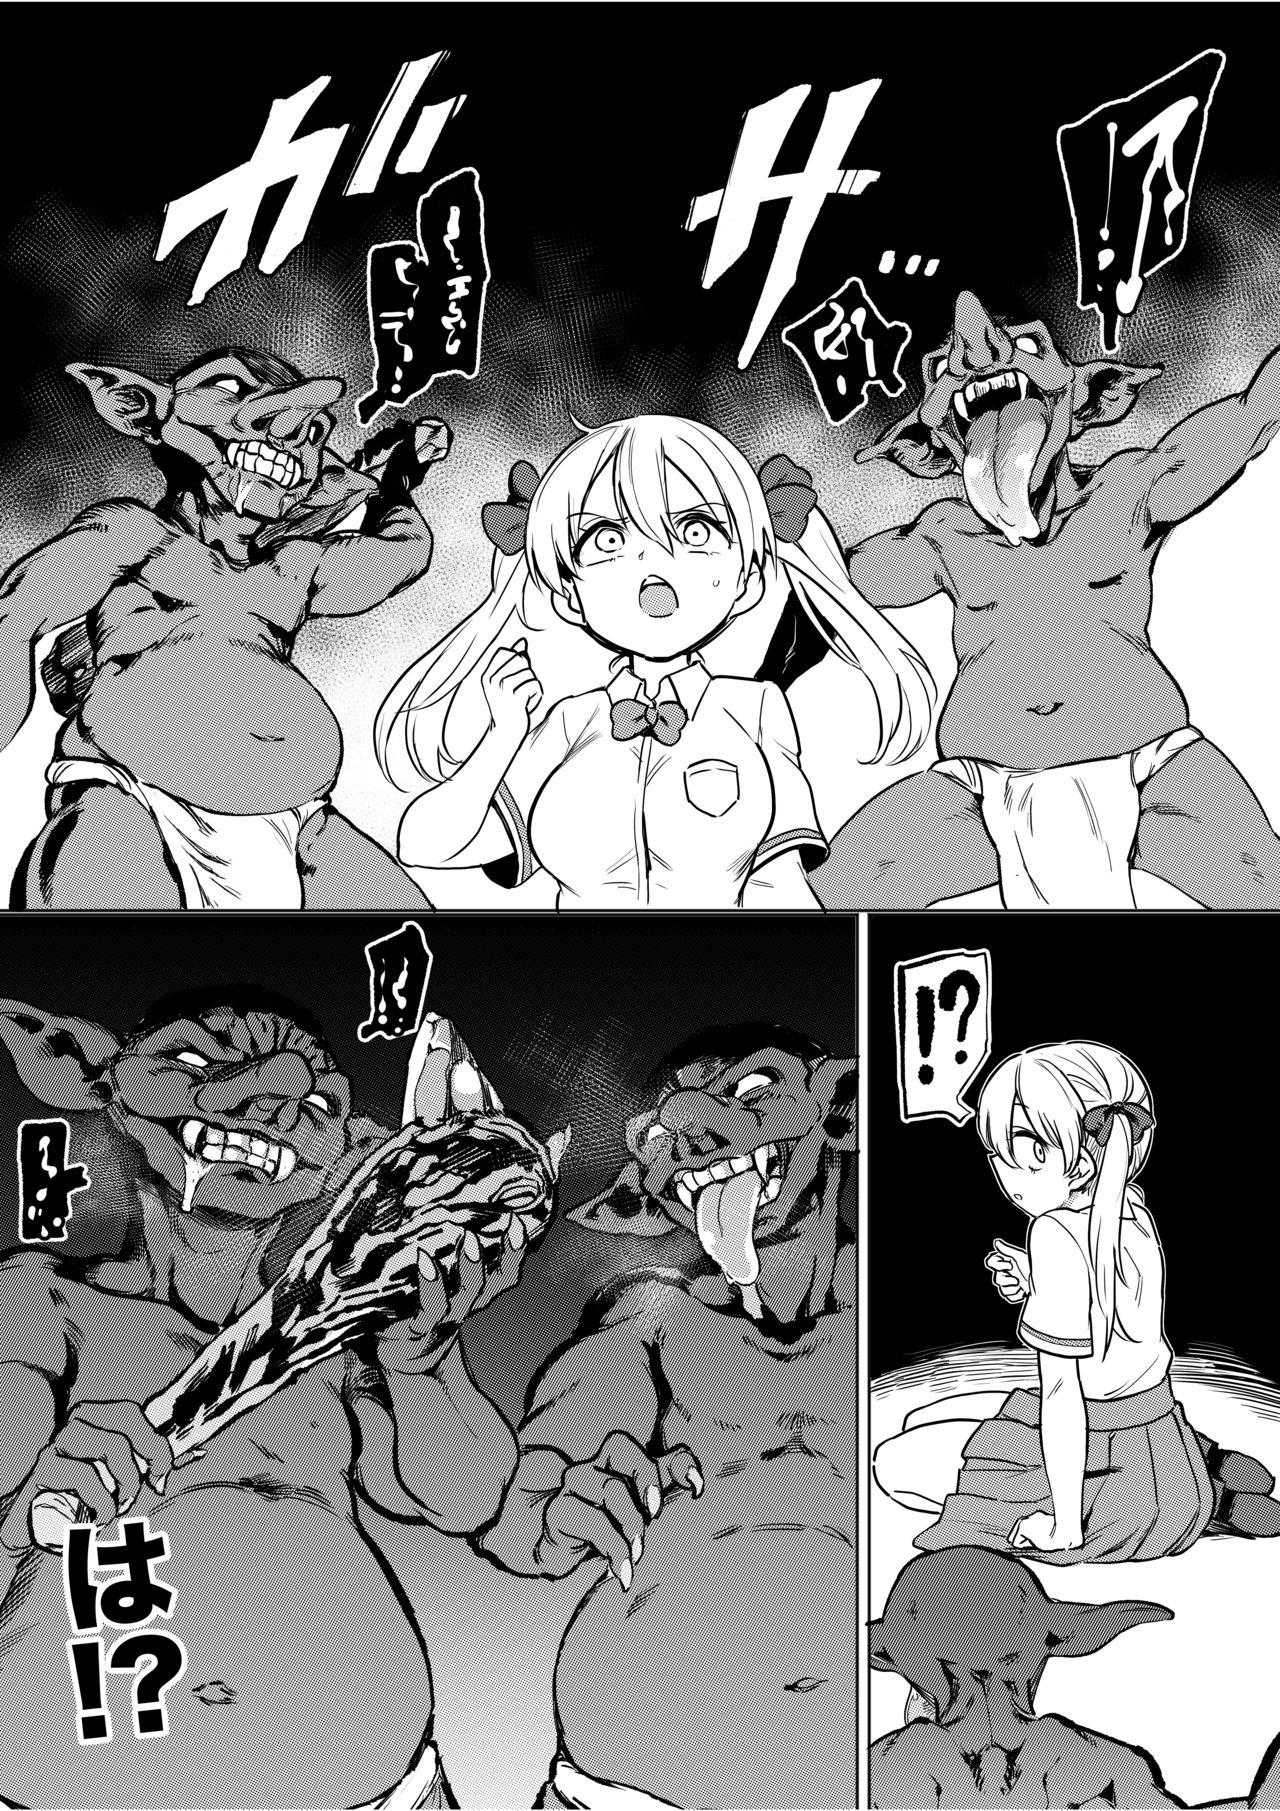 Free Blowjob Goblin x Schoolgirl x Submission - Gal - Original Monster - Page 3